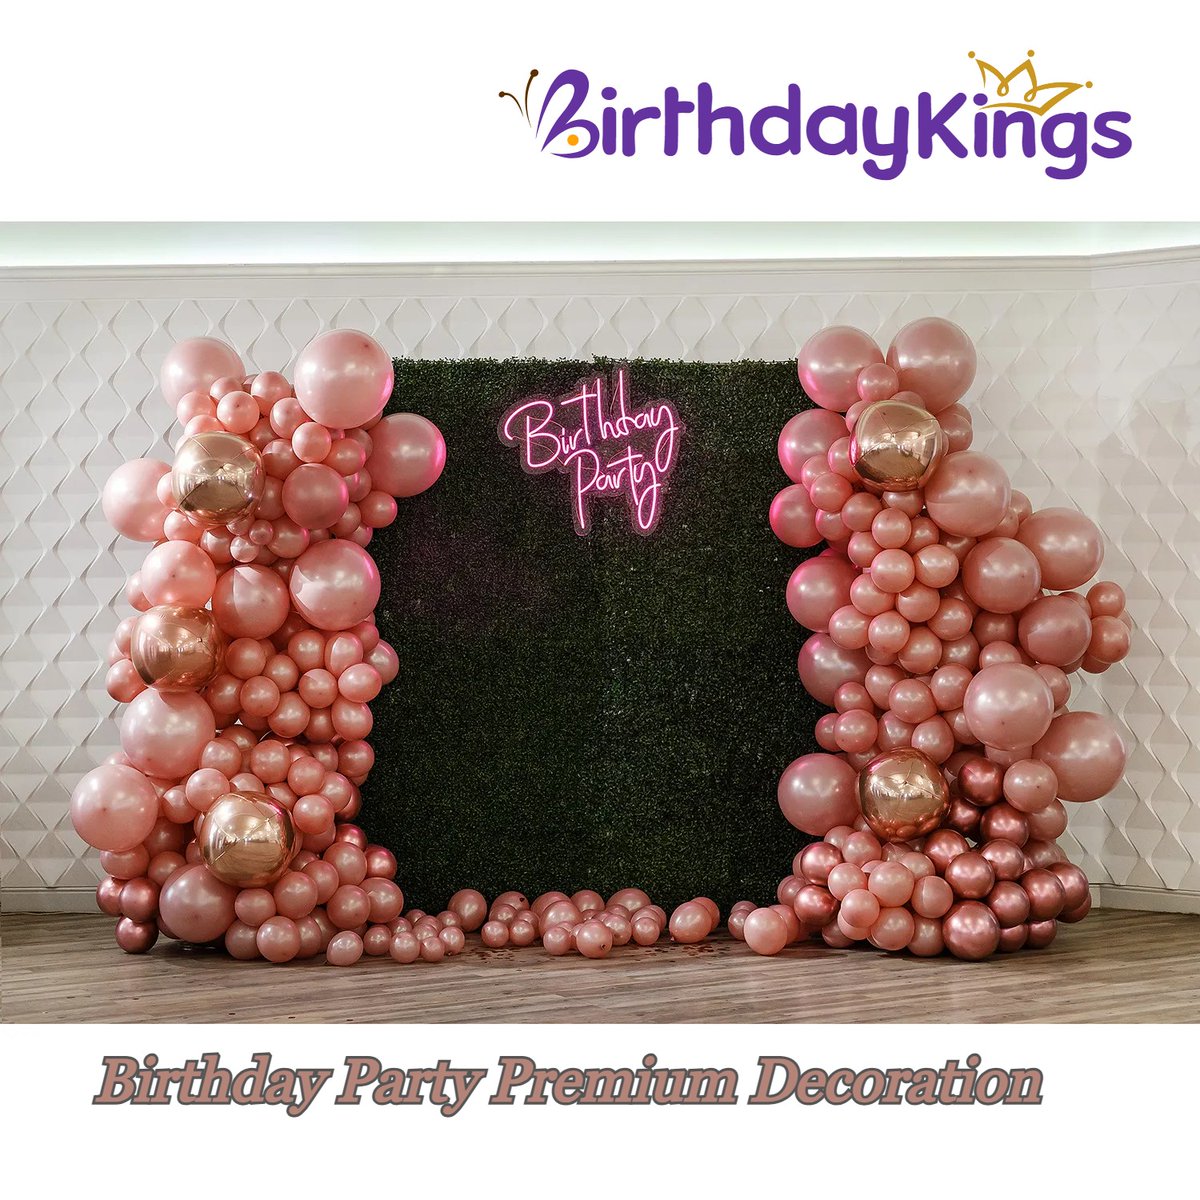 Birthday Party Premium Decoration @ ₹29,999.00

.

Book Now By clicking the link:- birthdaykings.com/product/birthd…

.

#booknow #bookingavailable #babygirl #carbootdecoration #decoration #birthdayking #birthdayparty #birthdayplanner #plannercommunity #eventplanner #eventslife